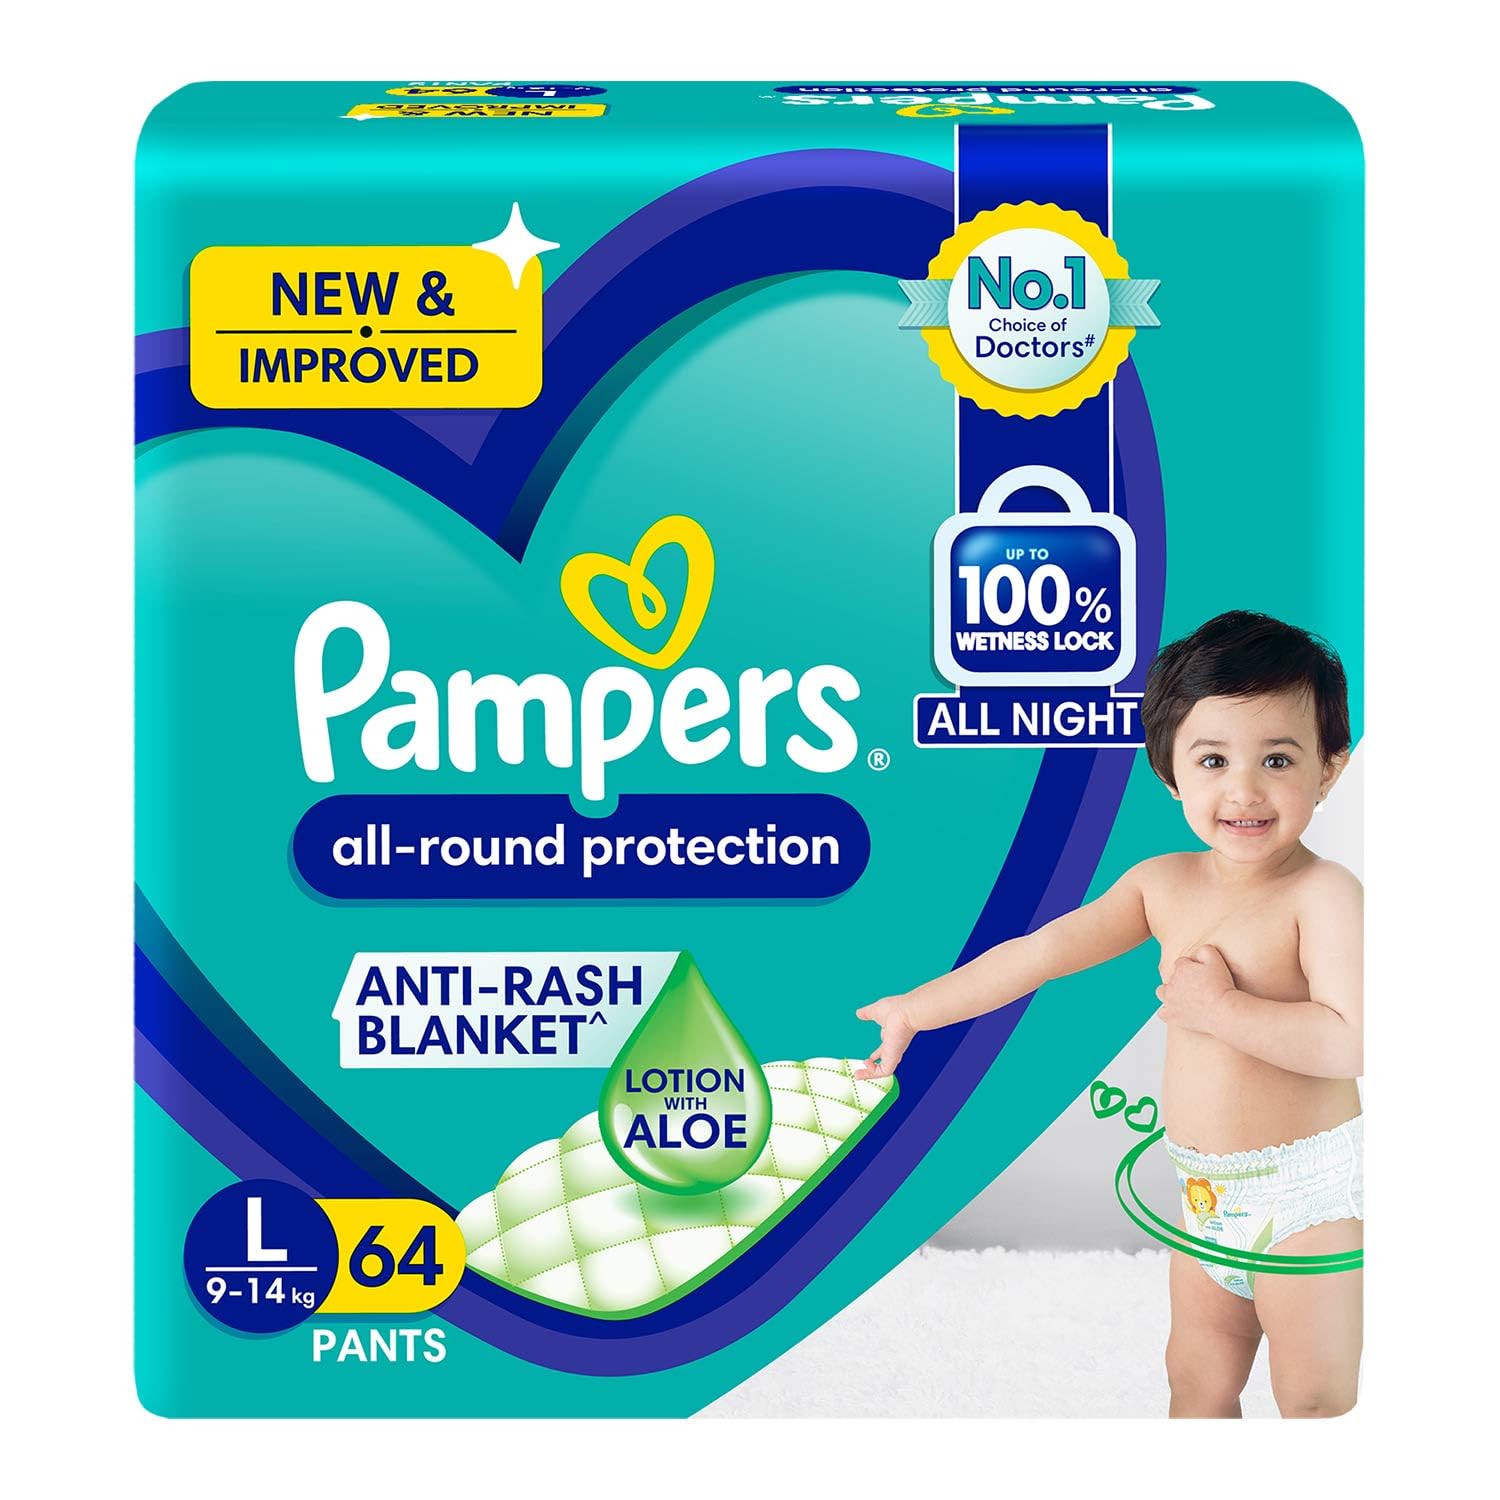 pampers new baby 1 promocja